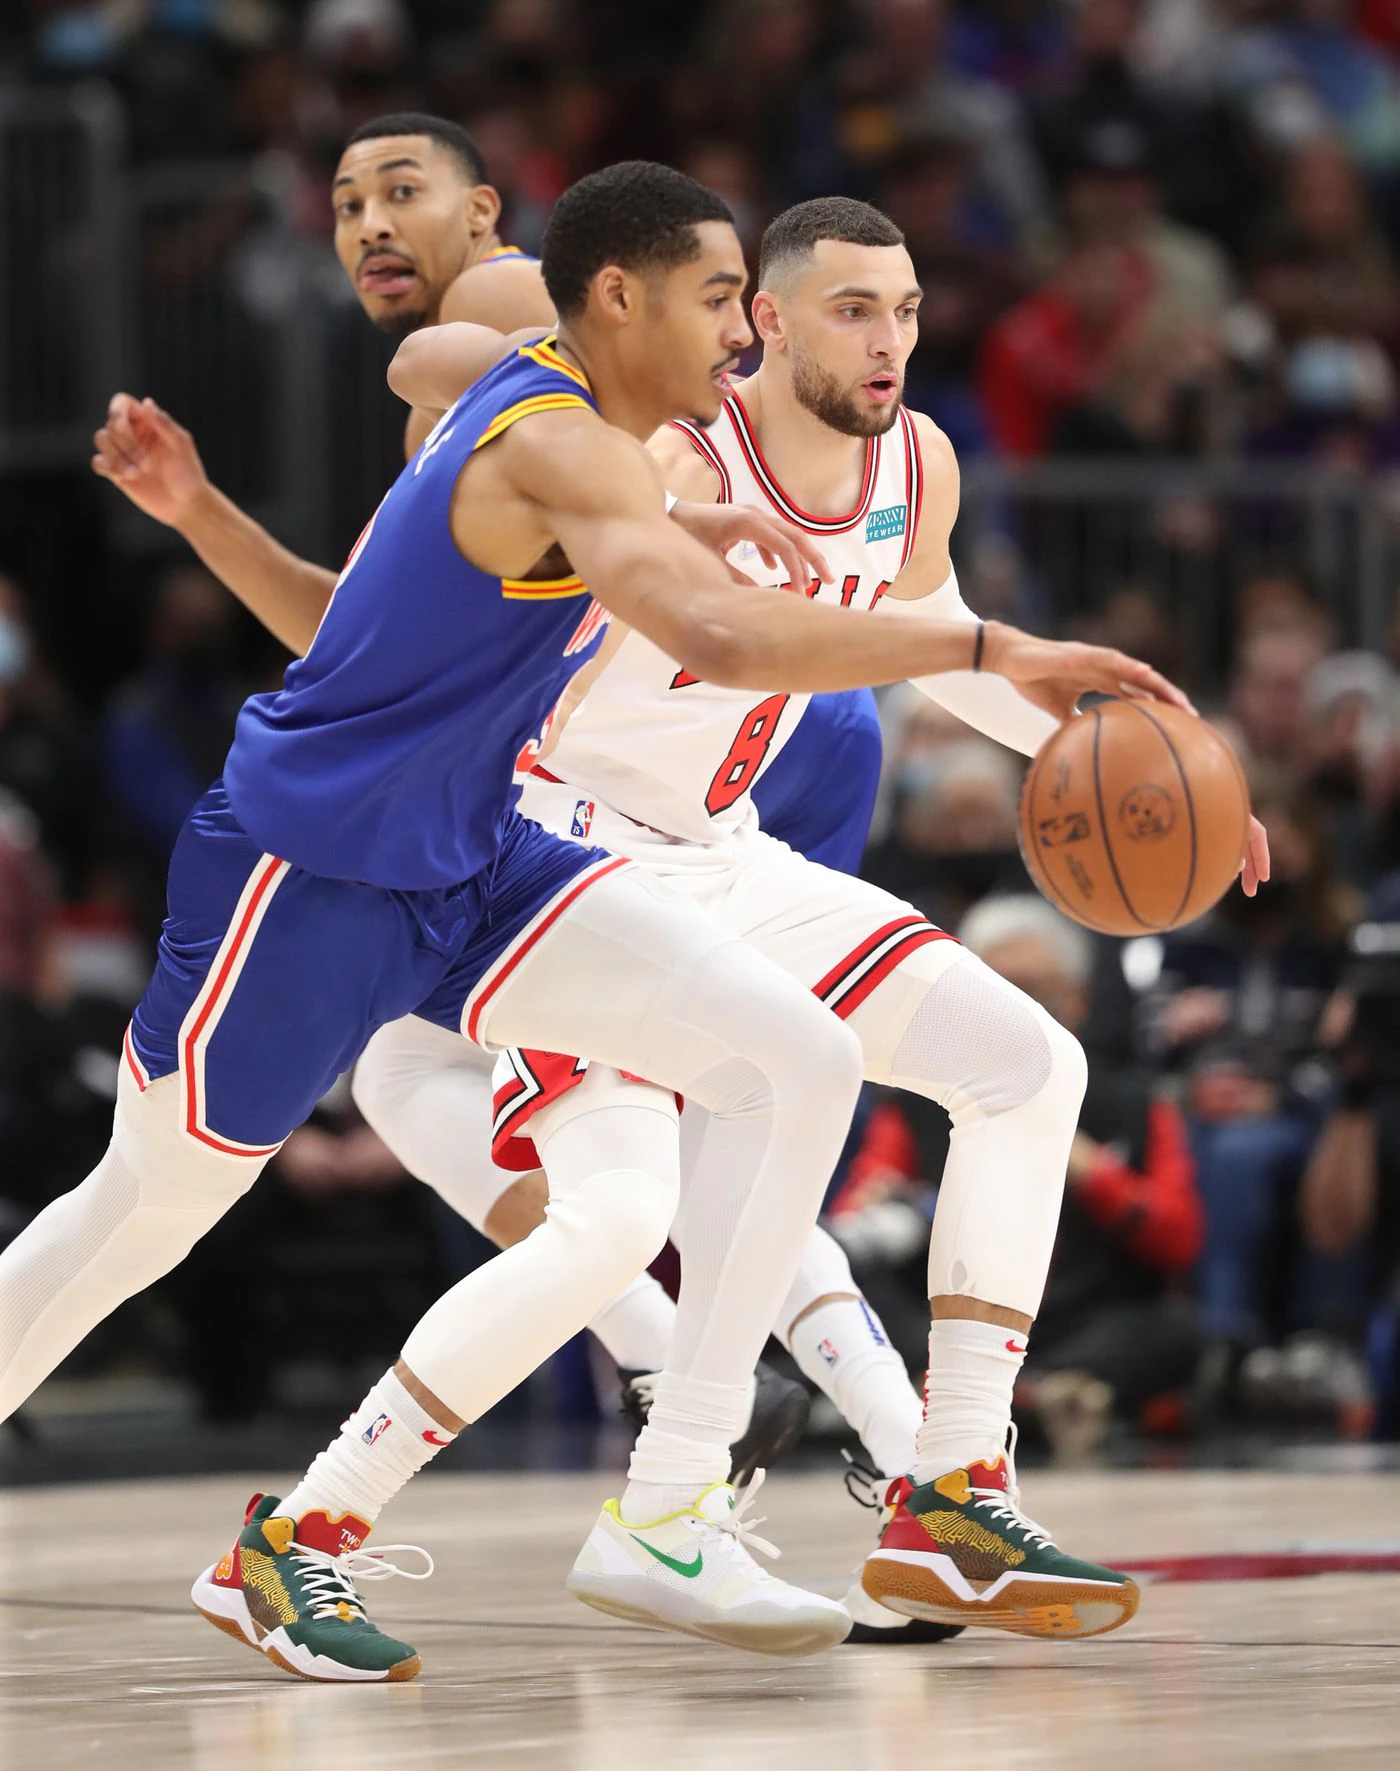 Chicago Bulls guard Zach LaVine (8) defends Golden State Warriors guard Jordan Poole (3) in the first quarter at United Center on Jan. 14, 2022, in Chicago.